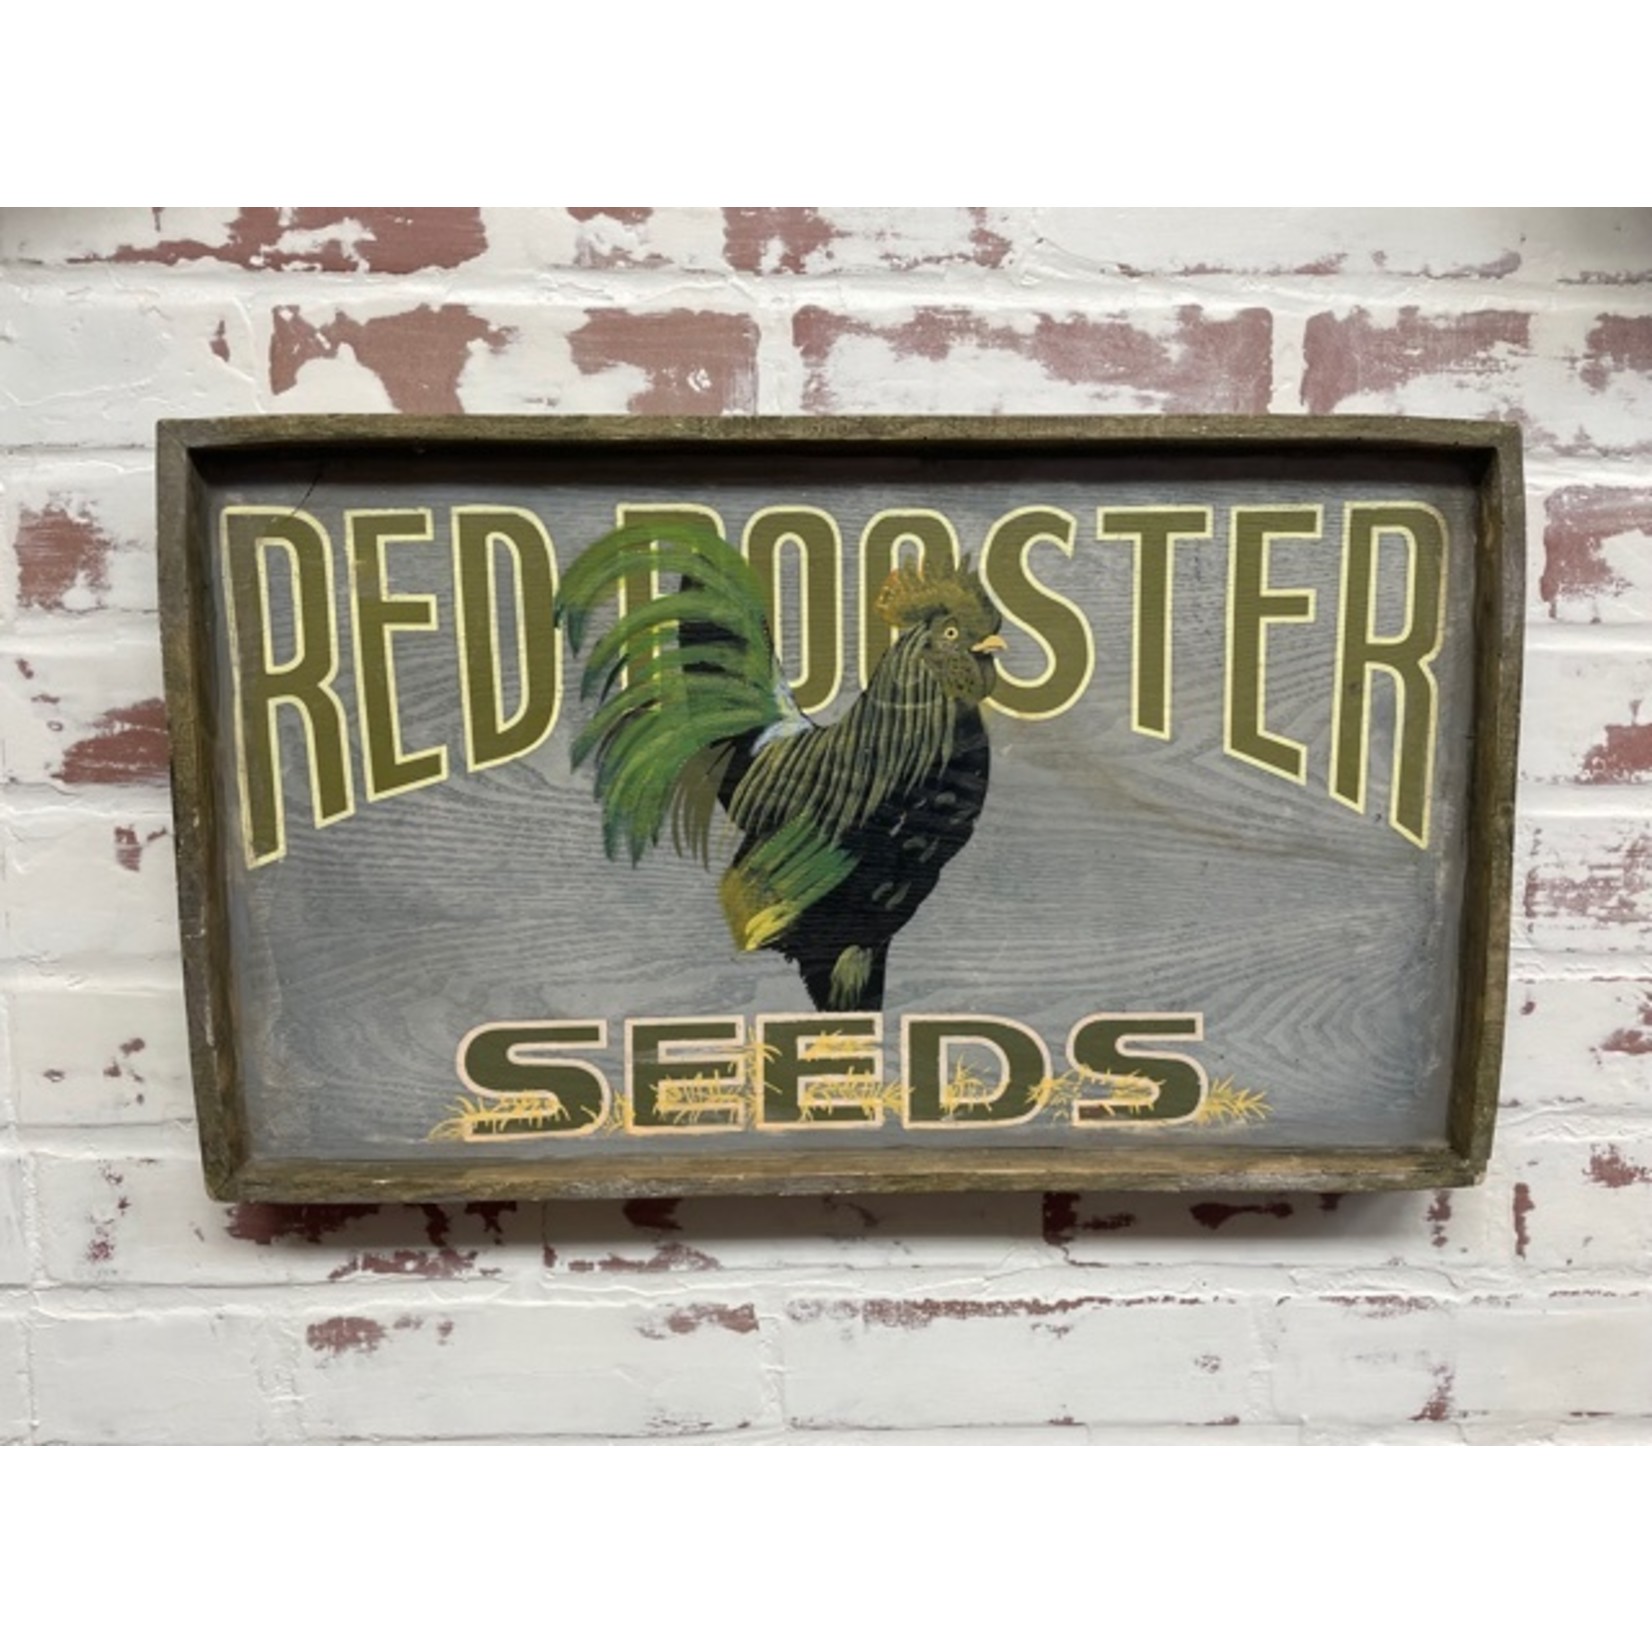 W.A.S Red Rooster Sign